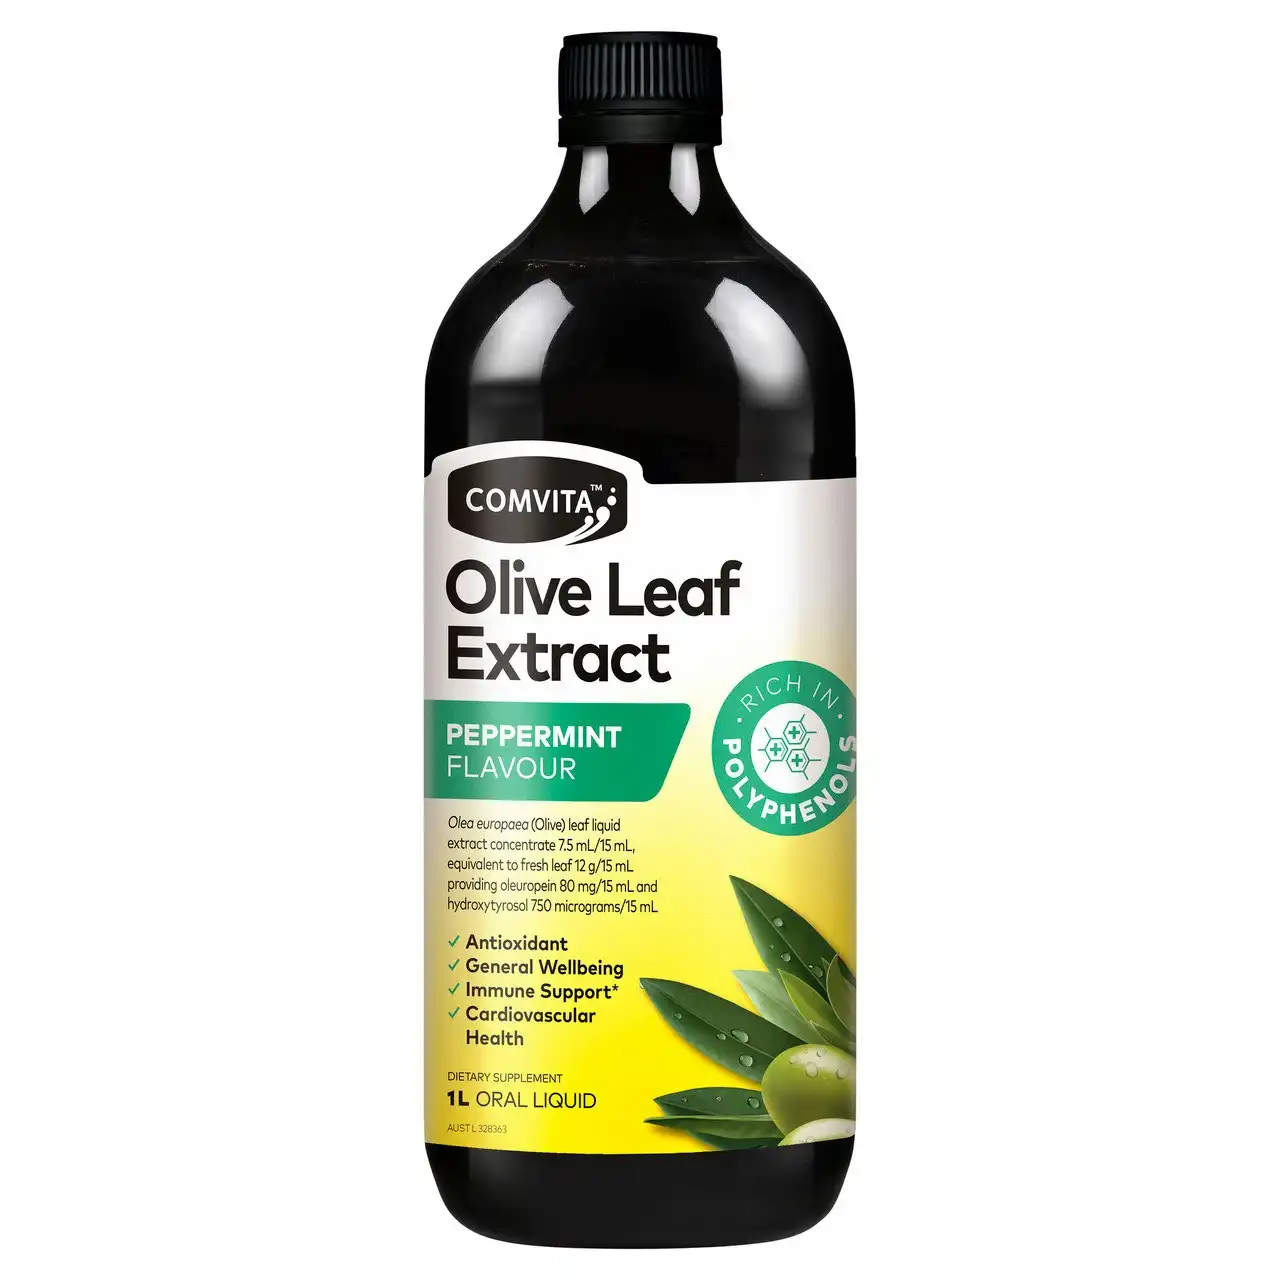 Comvita Olive Leaf Extract Peppermint Flavour 1L